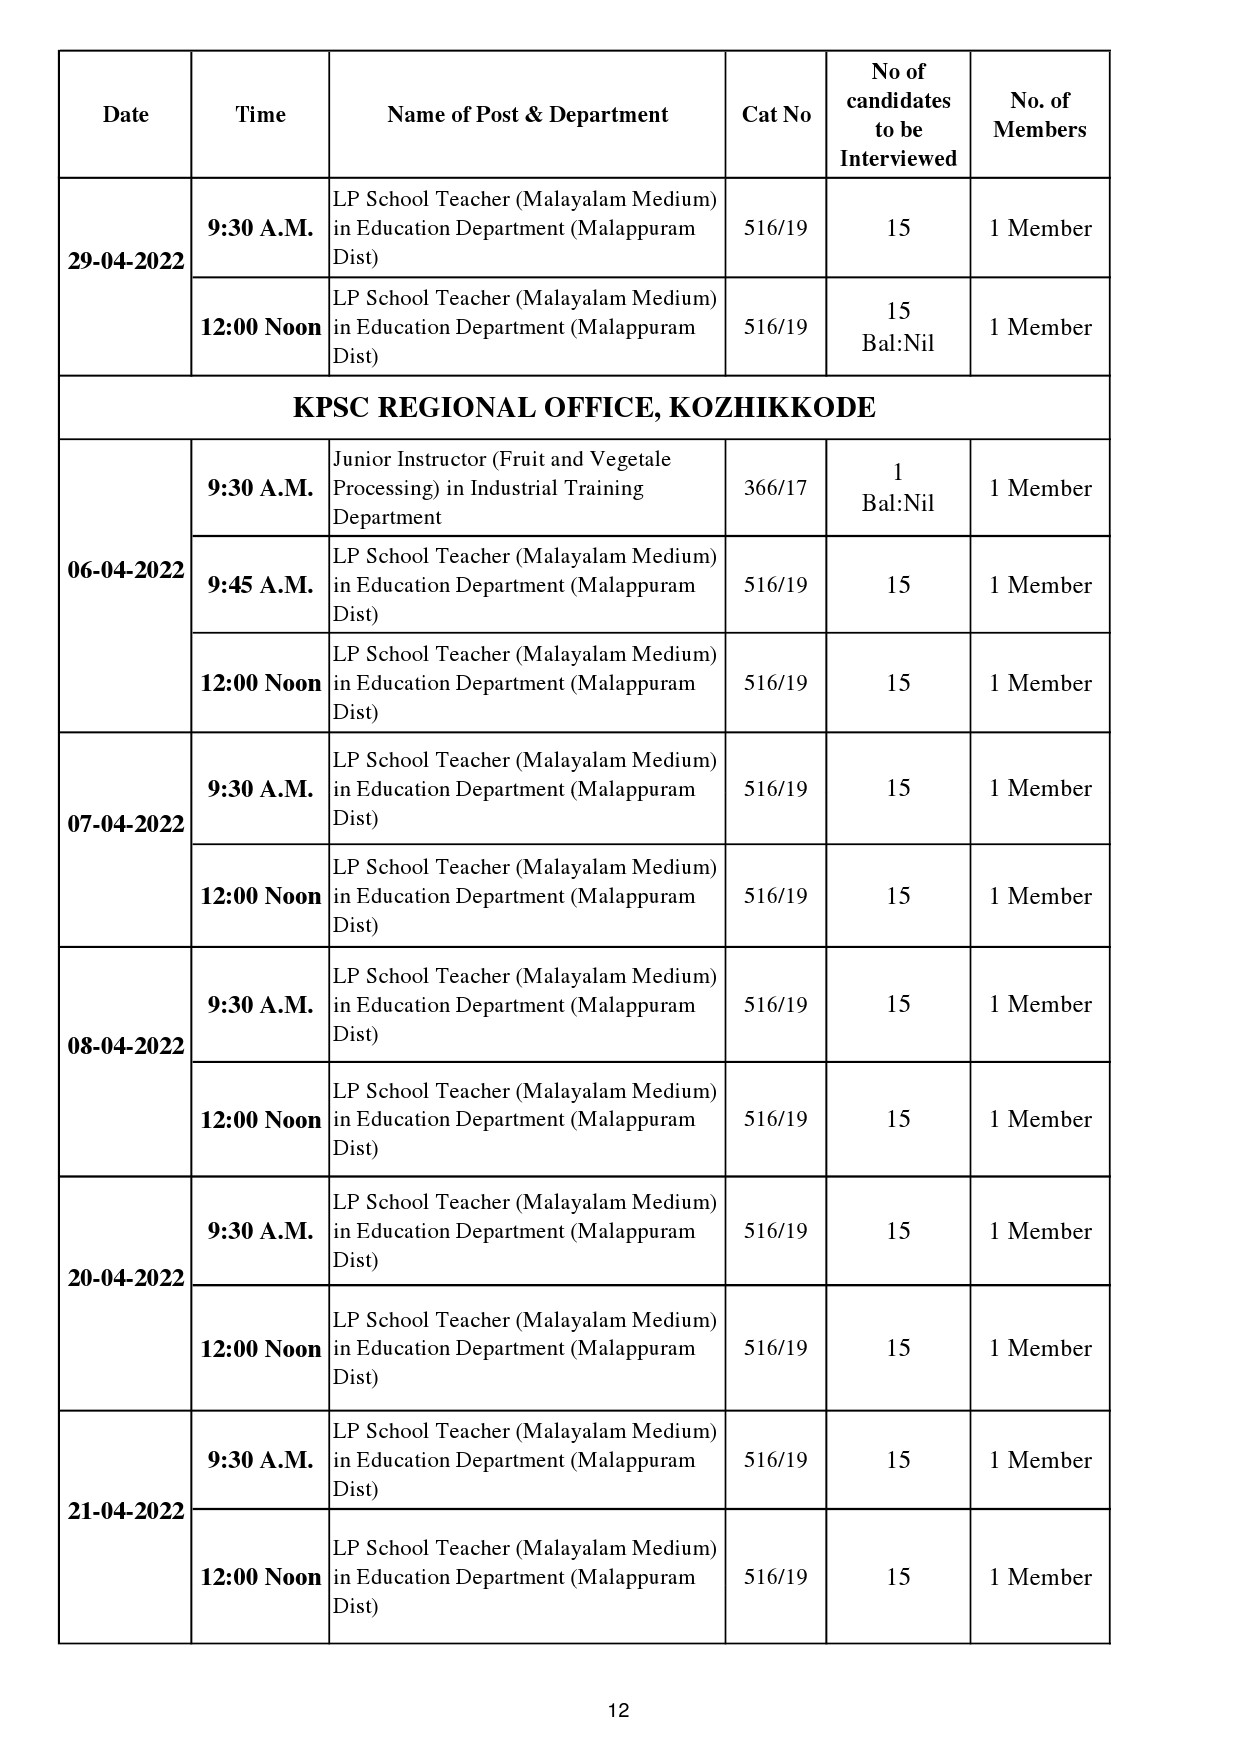 KPSC Interview Programme for the Month of April 2022 - Notification Image 12